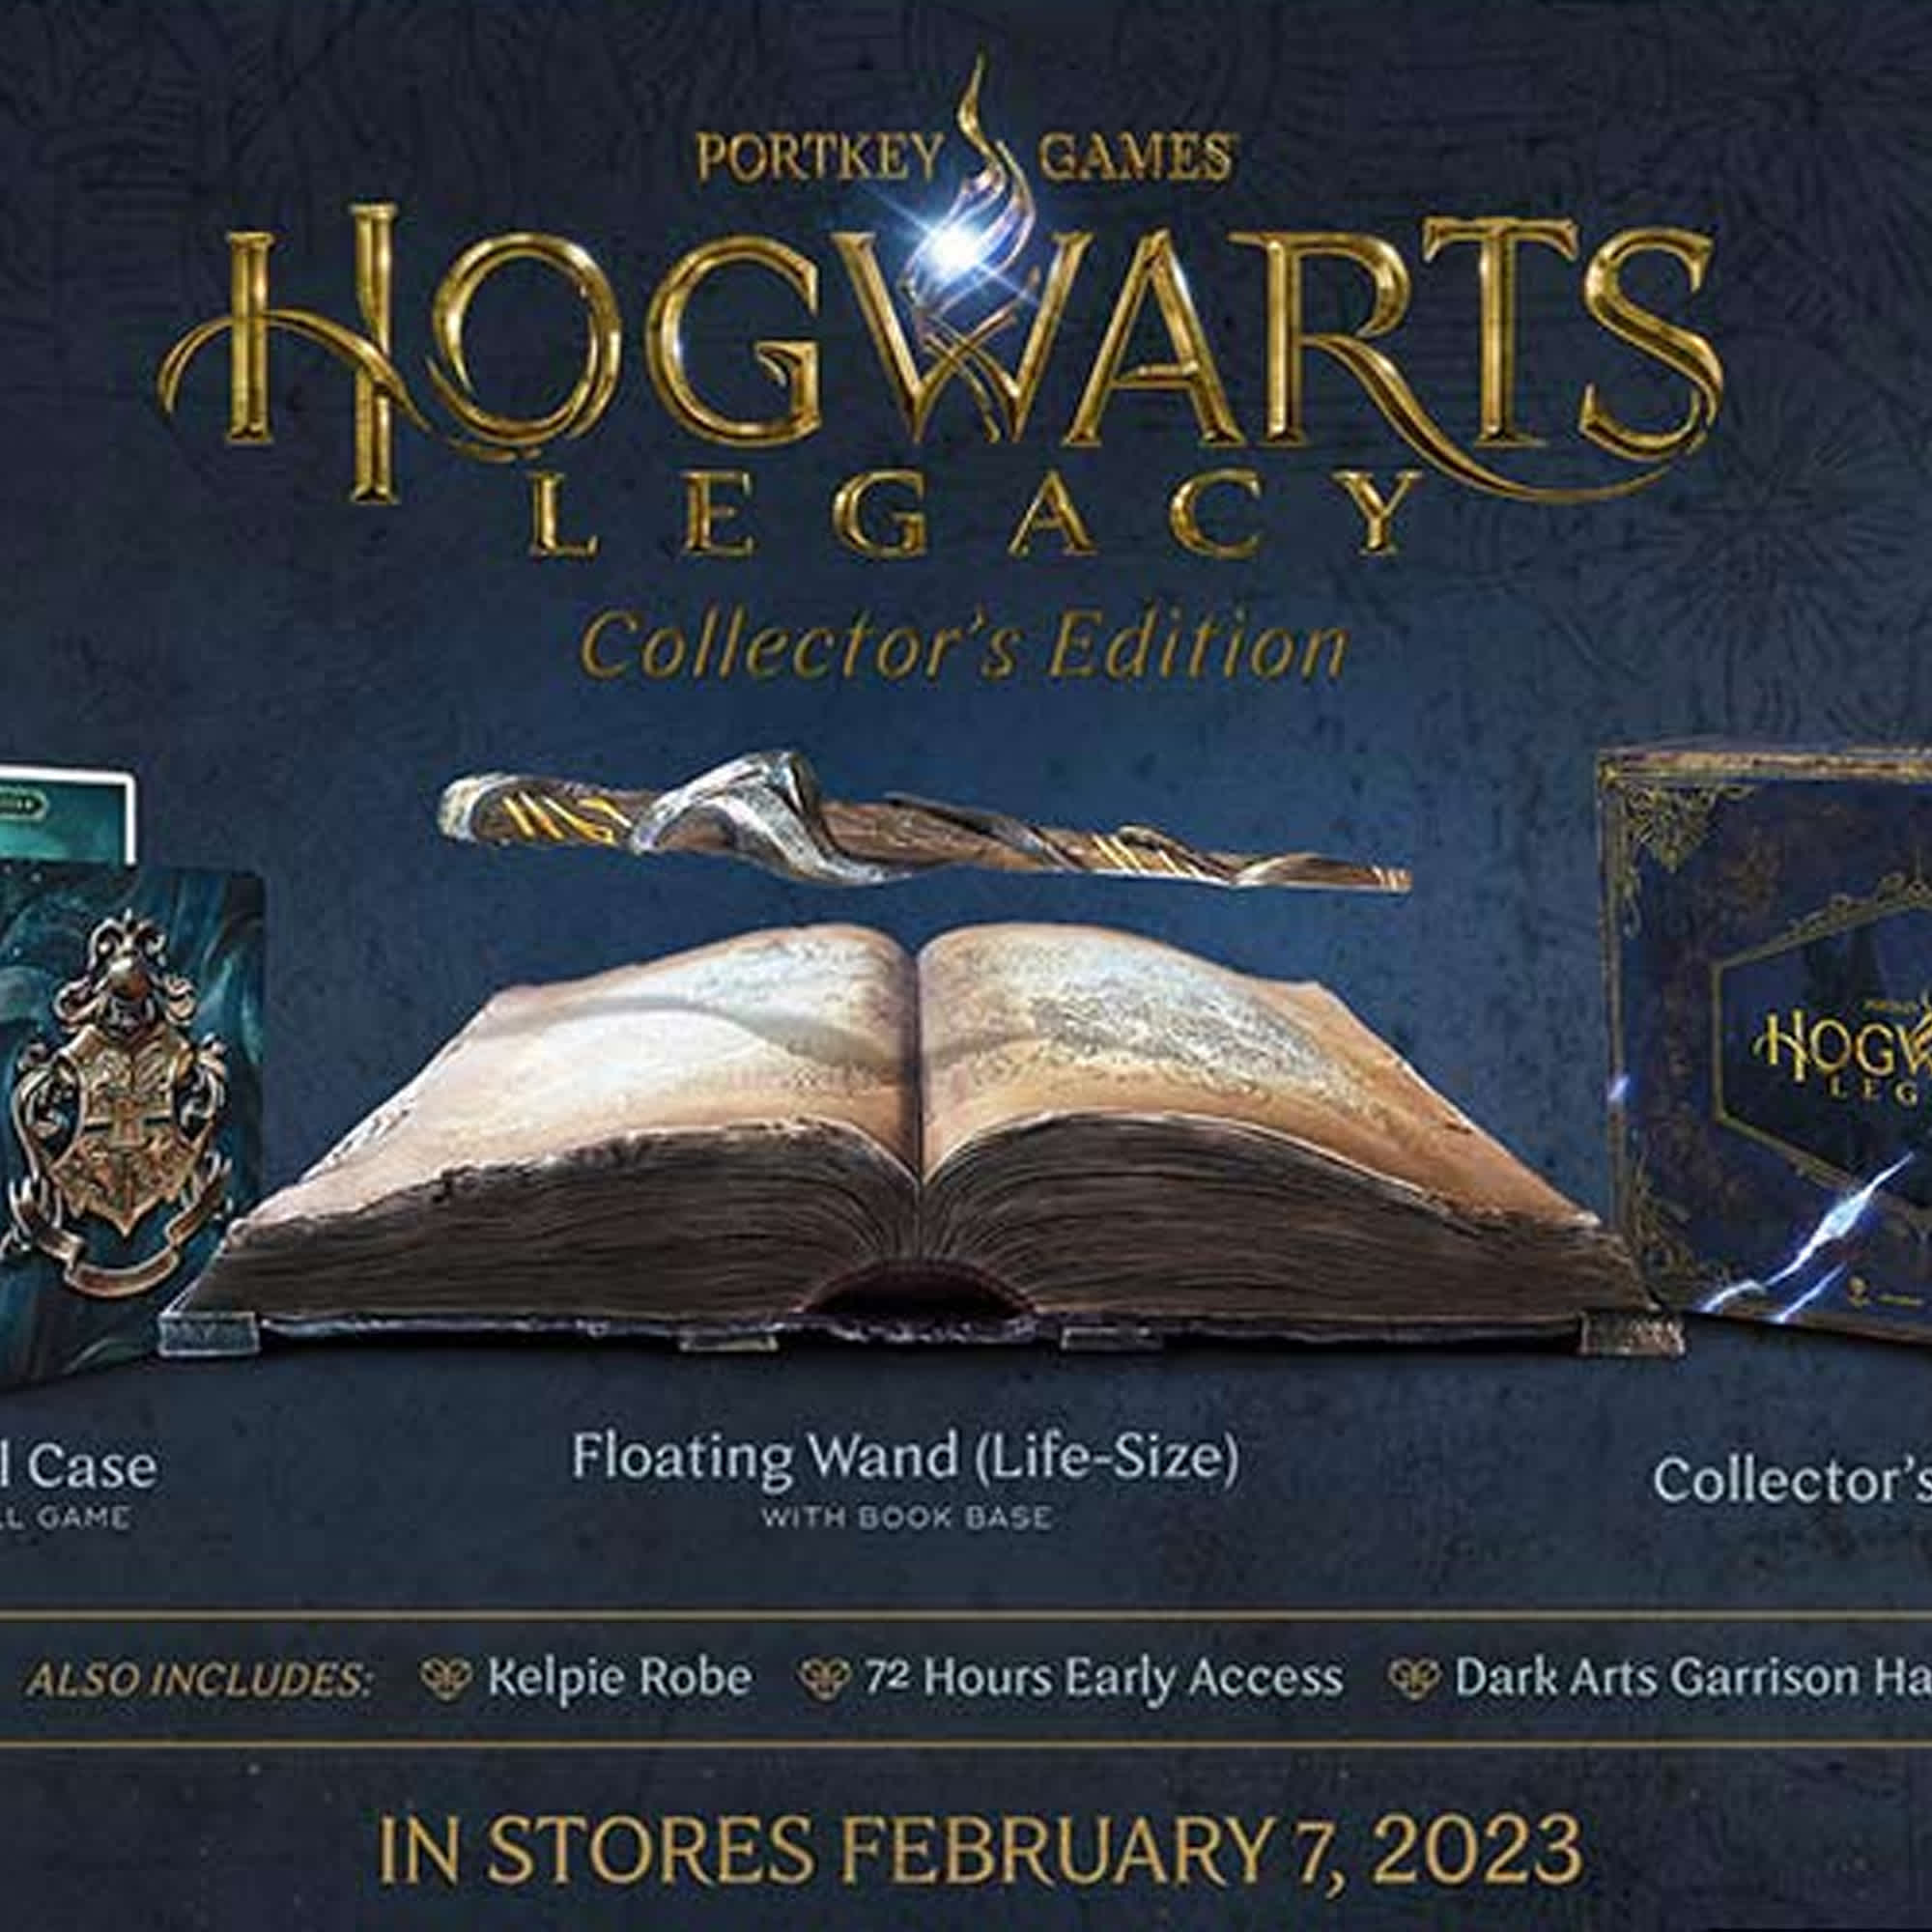 I had pre-orderer the digital deluxe edition of Hogwarts Legacy on